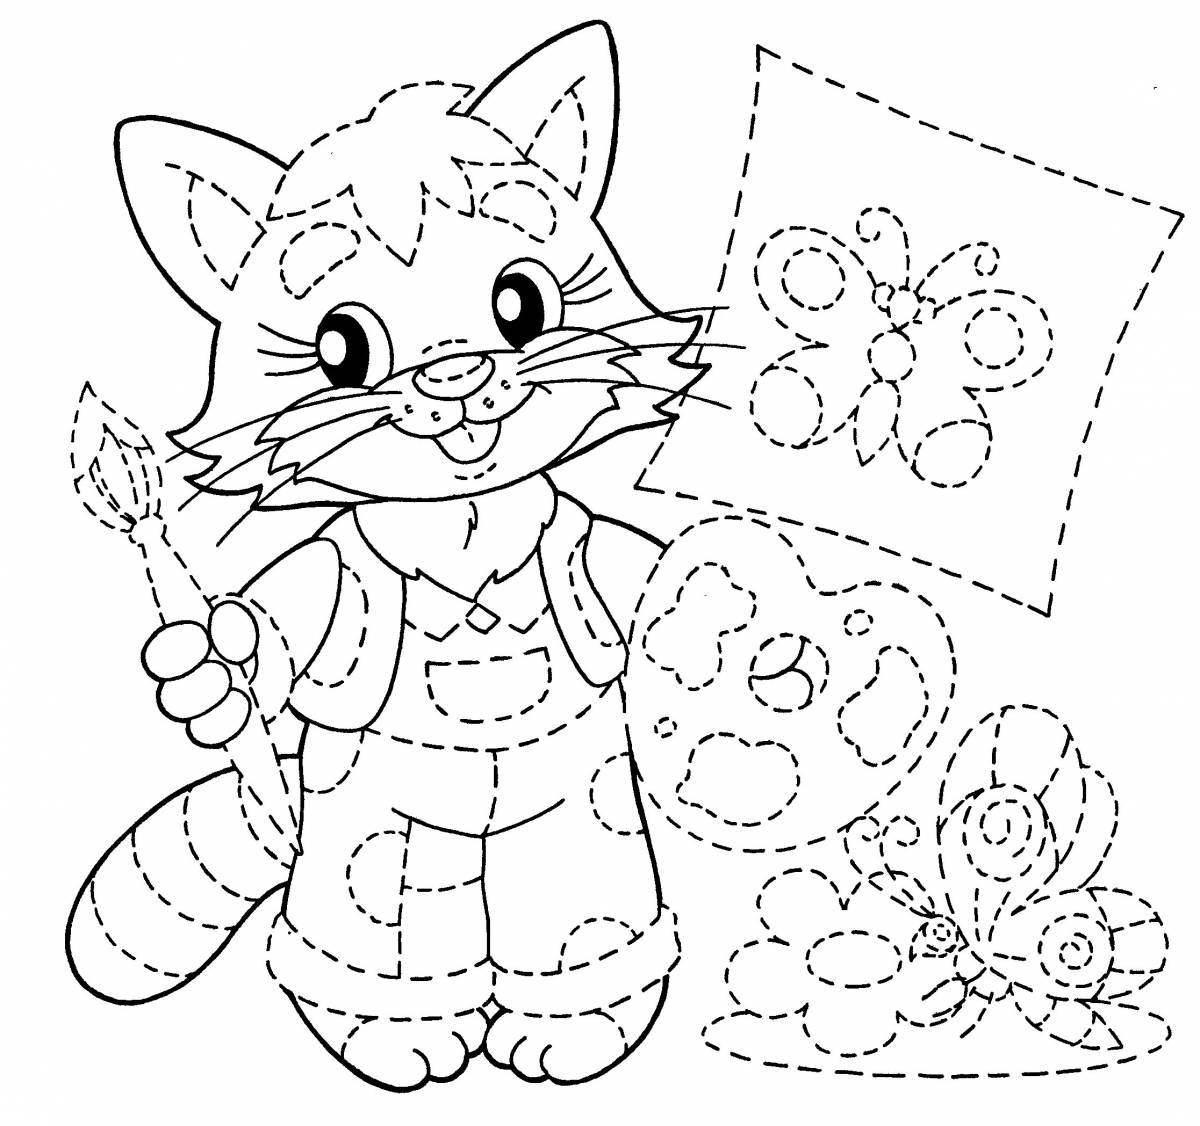 Stimulating coloring book for 6-7 year olds